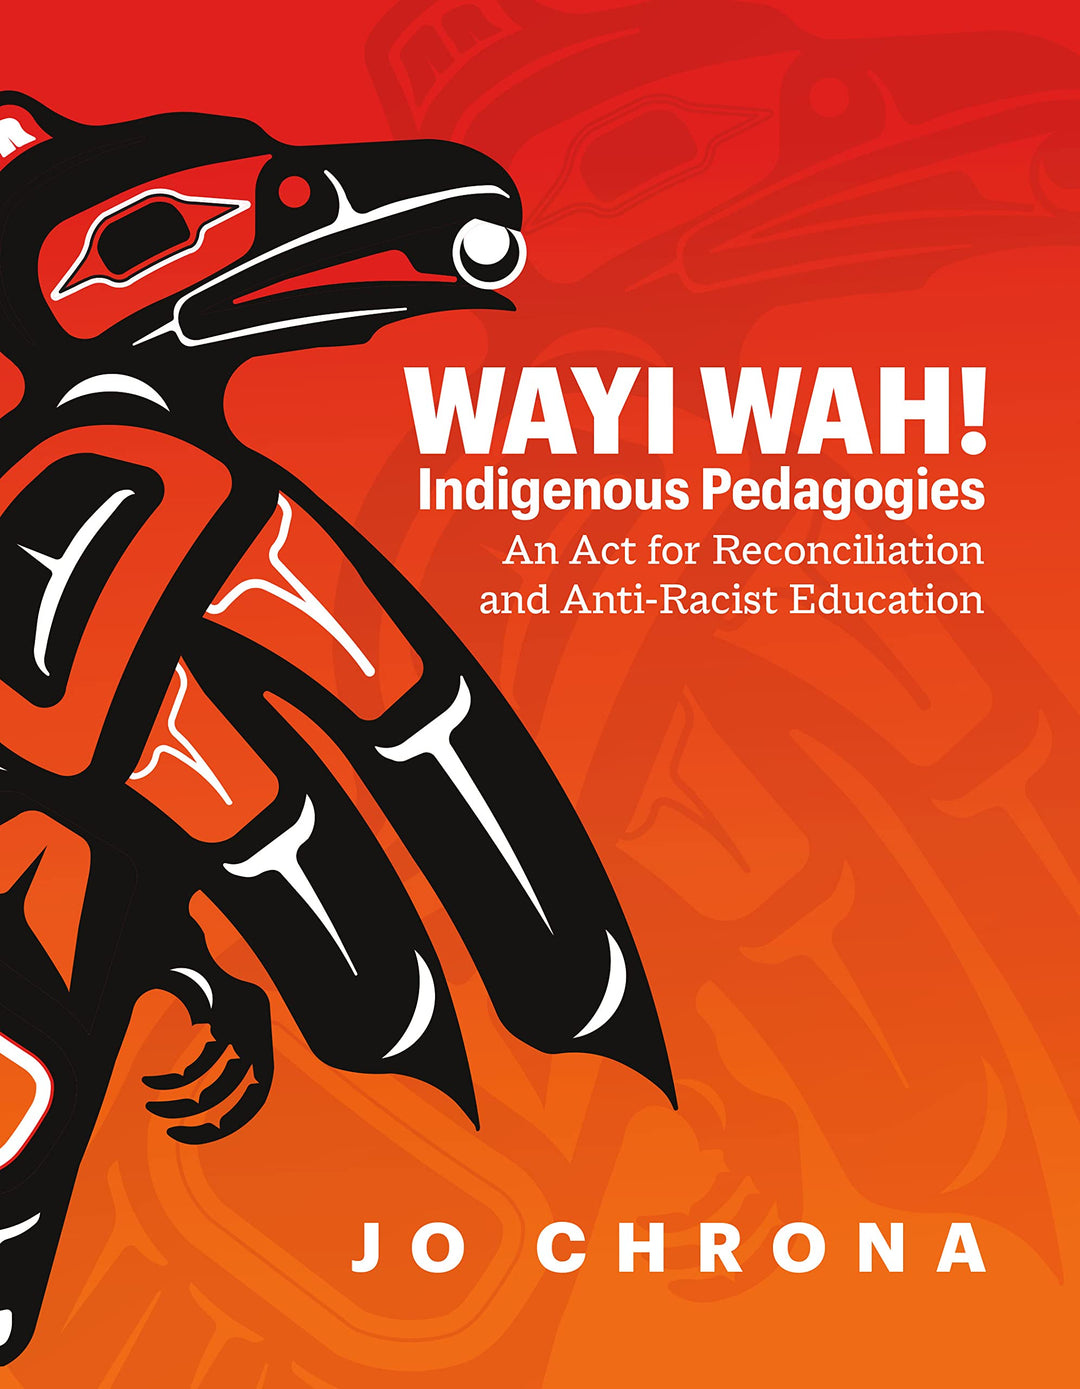 Wayi Wah! Indigenous Pedagogies: An ACT for Reconciliation and Anti-Racist Education by Jo Chrona